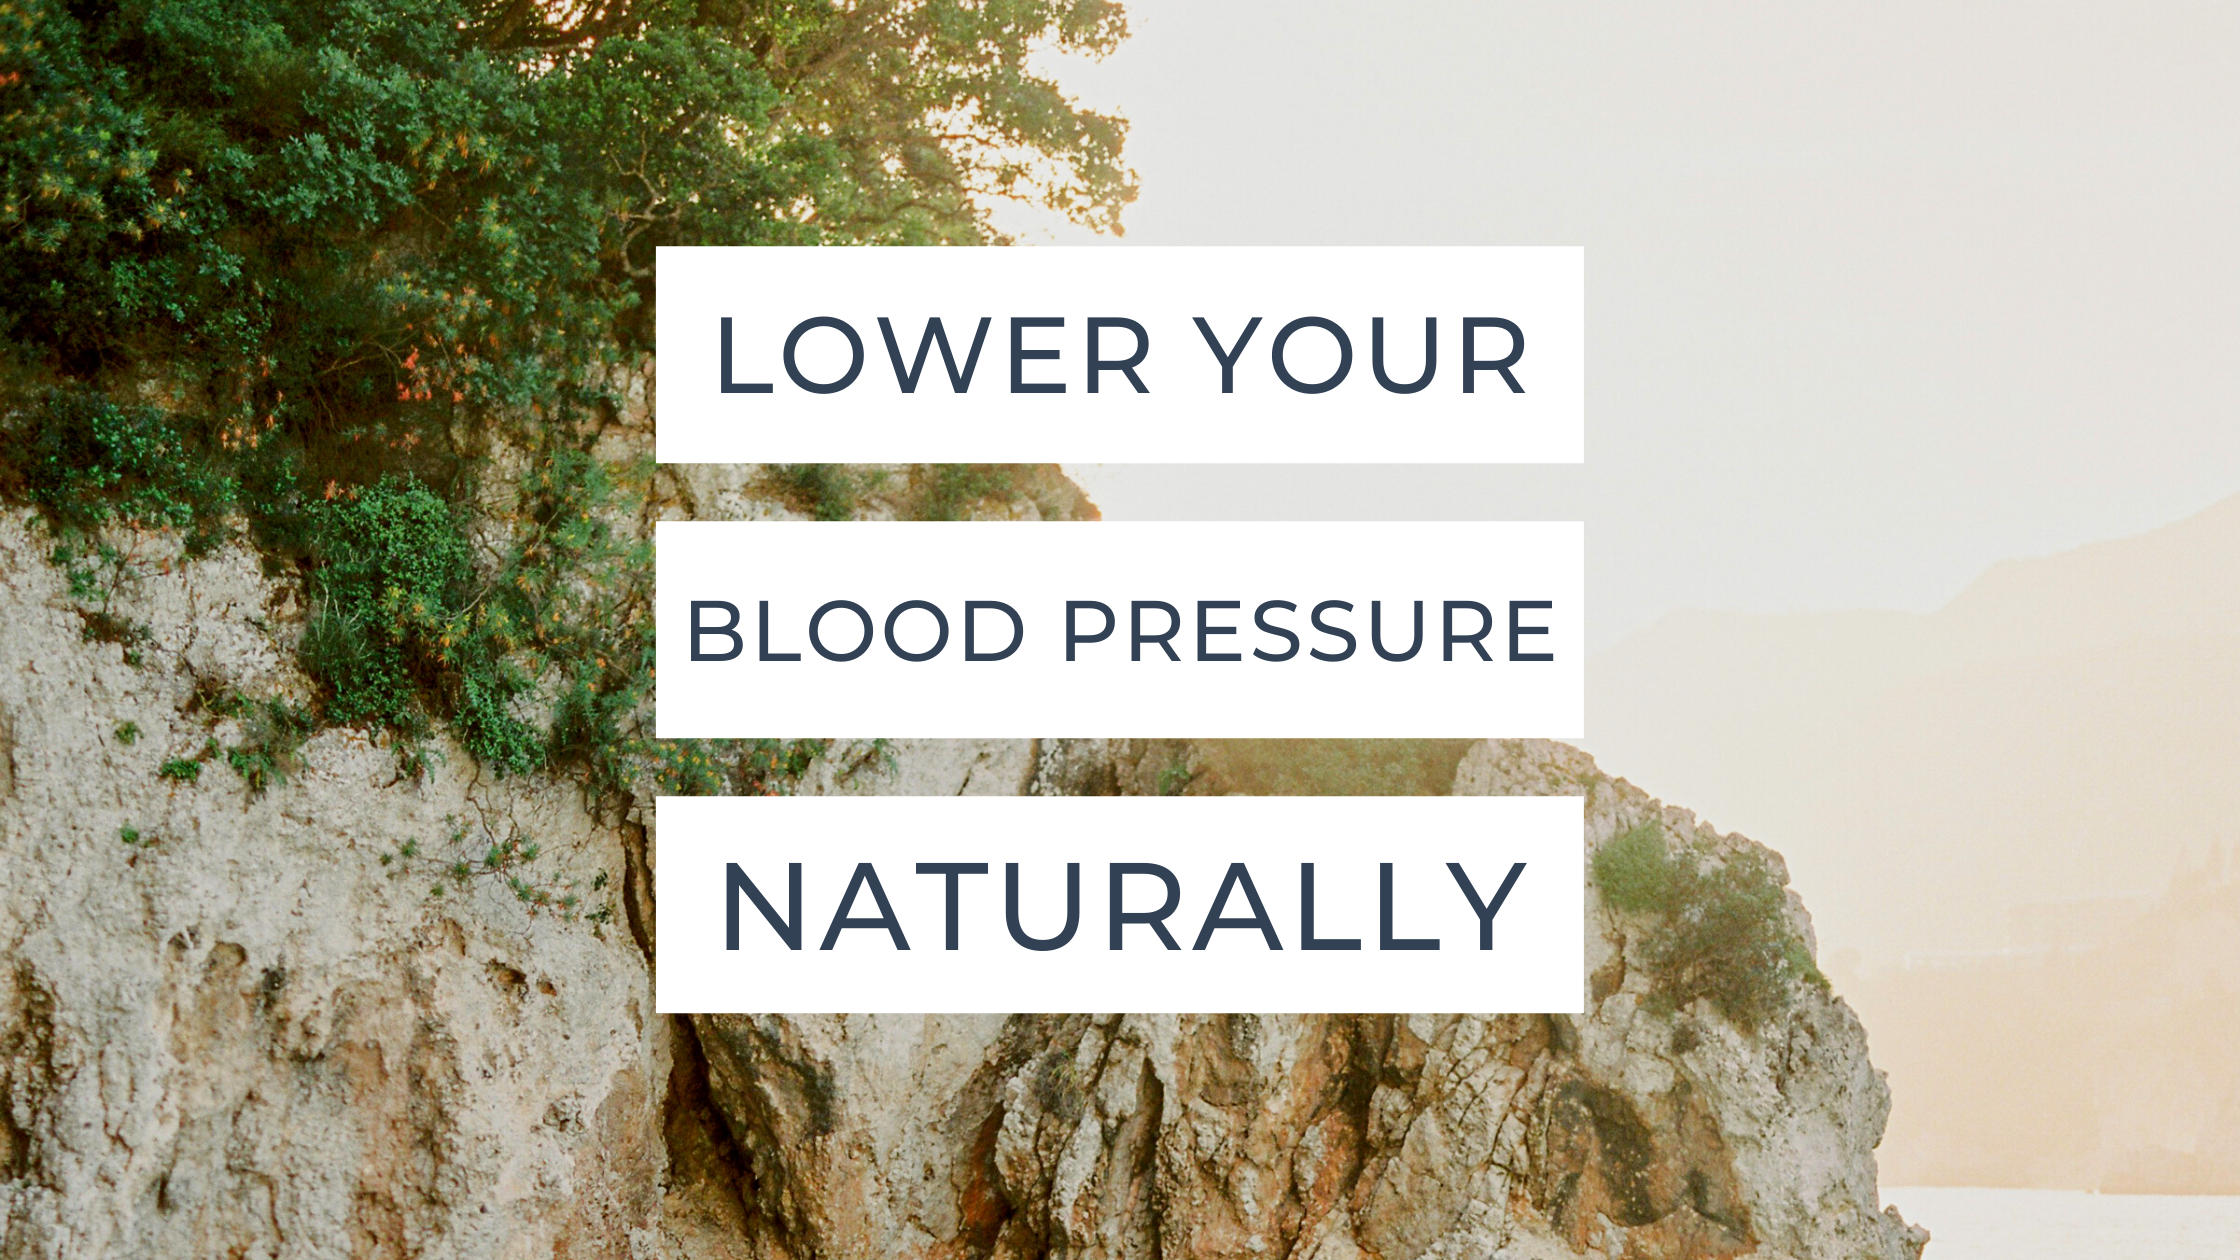 Lower your blood pressure naturally by getting outside in the sunshine. 